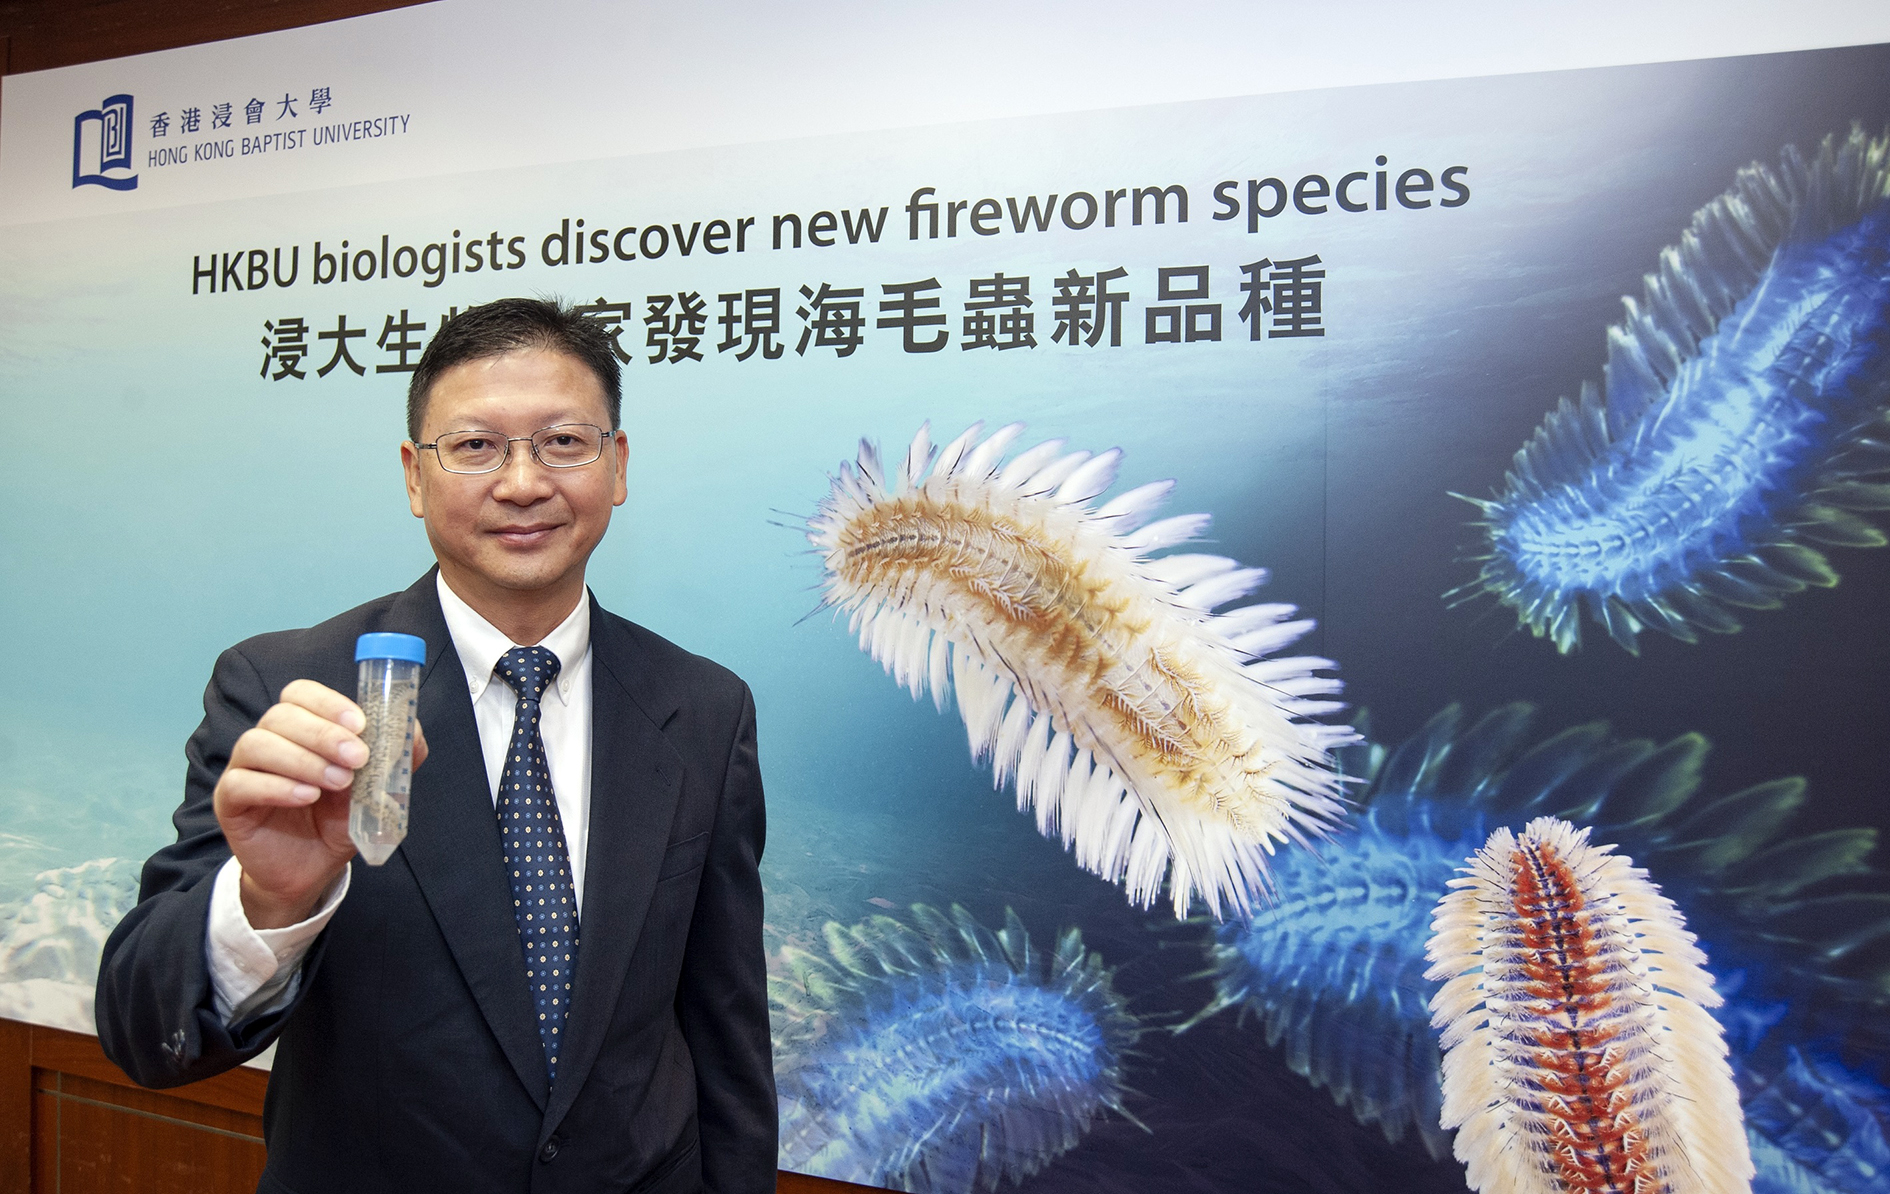 New fireworm species discovered in Hong Kong waters